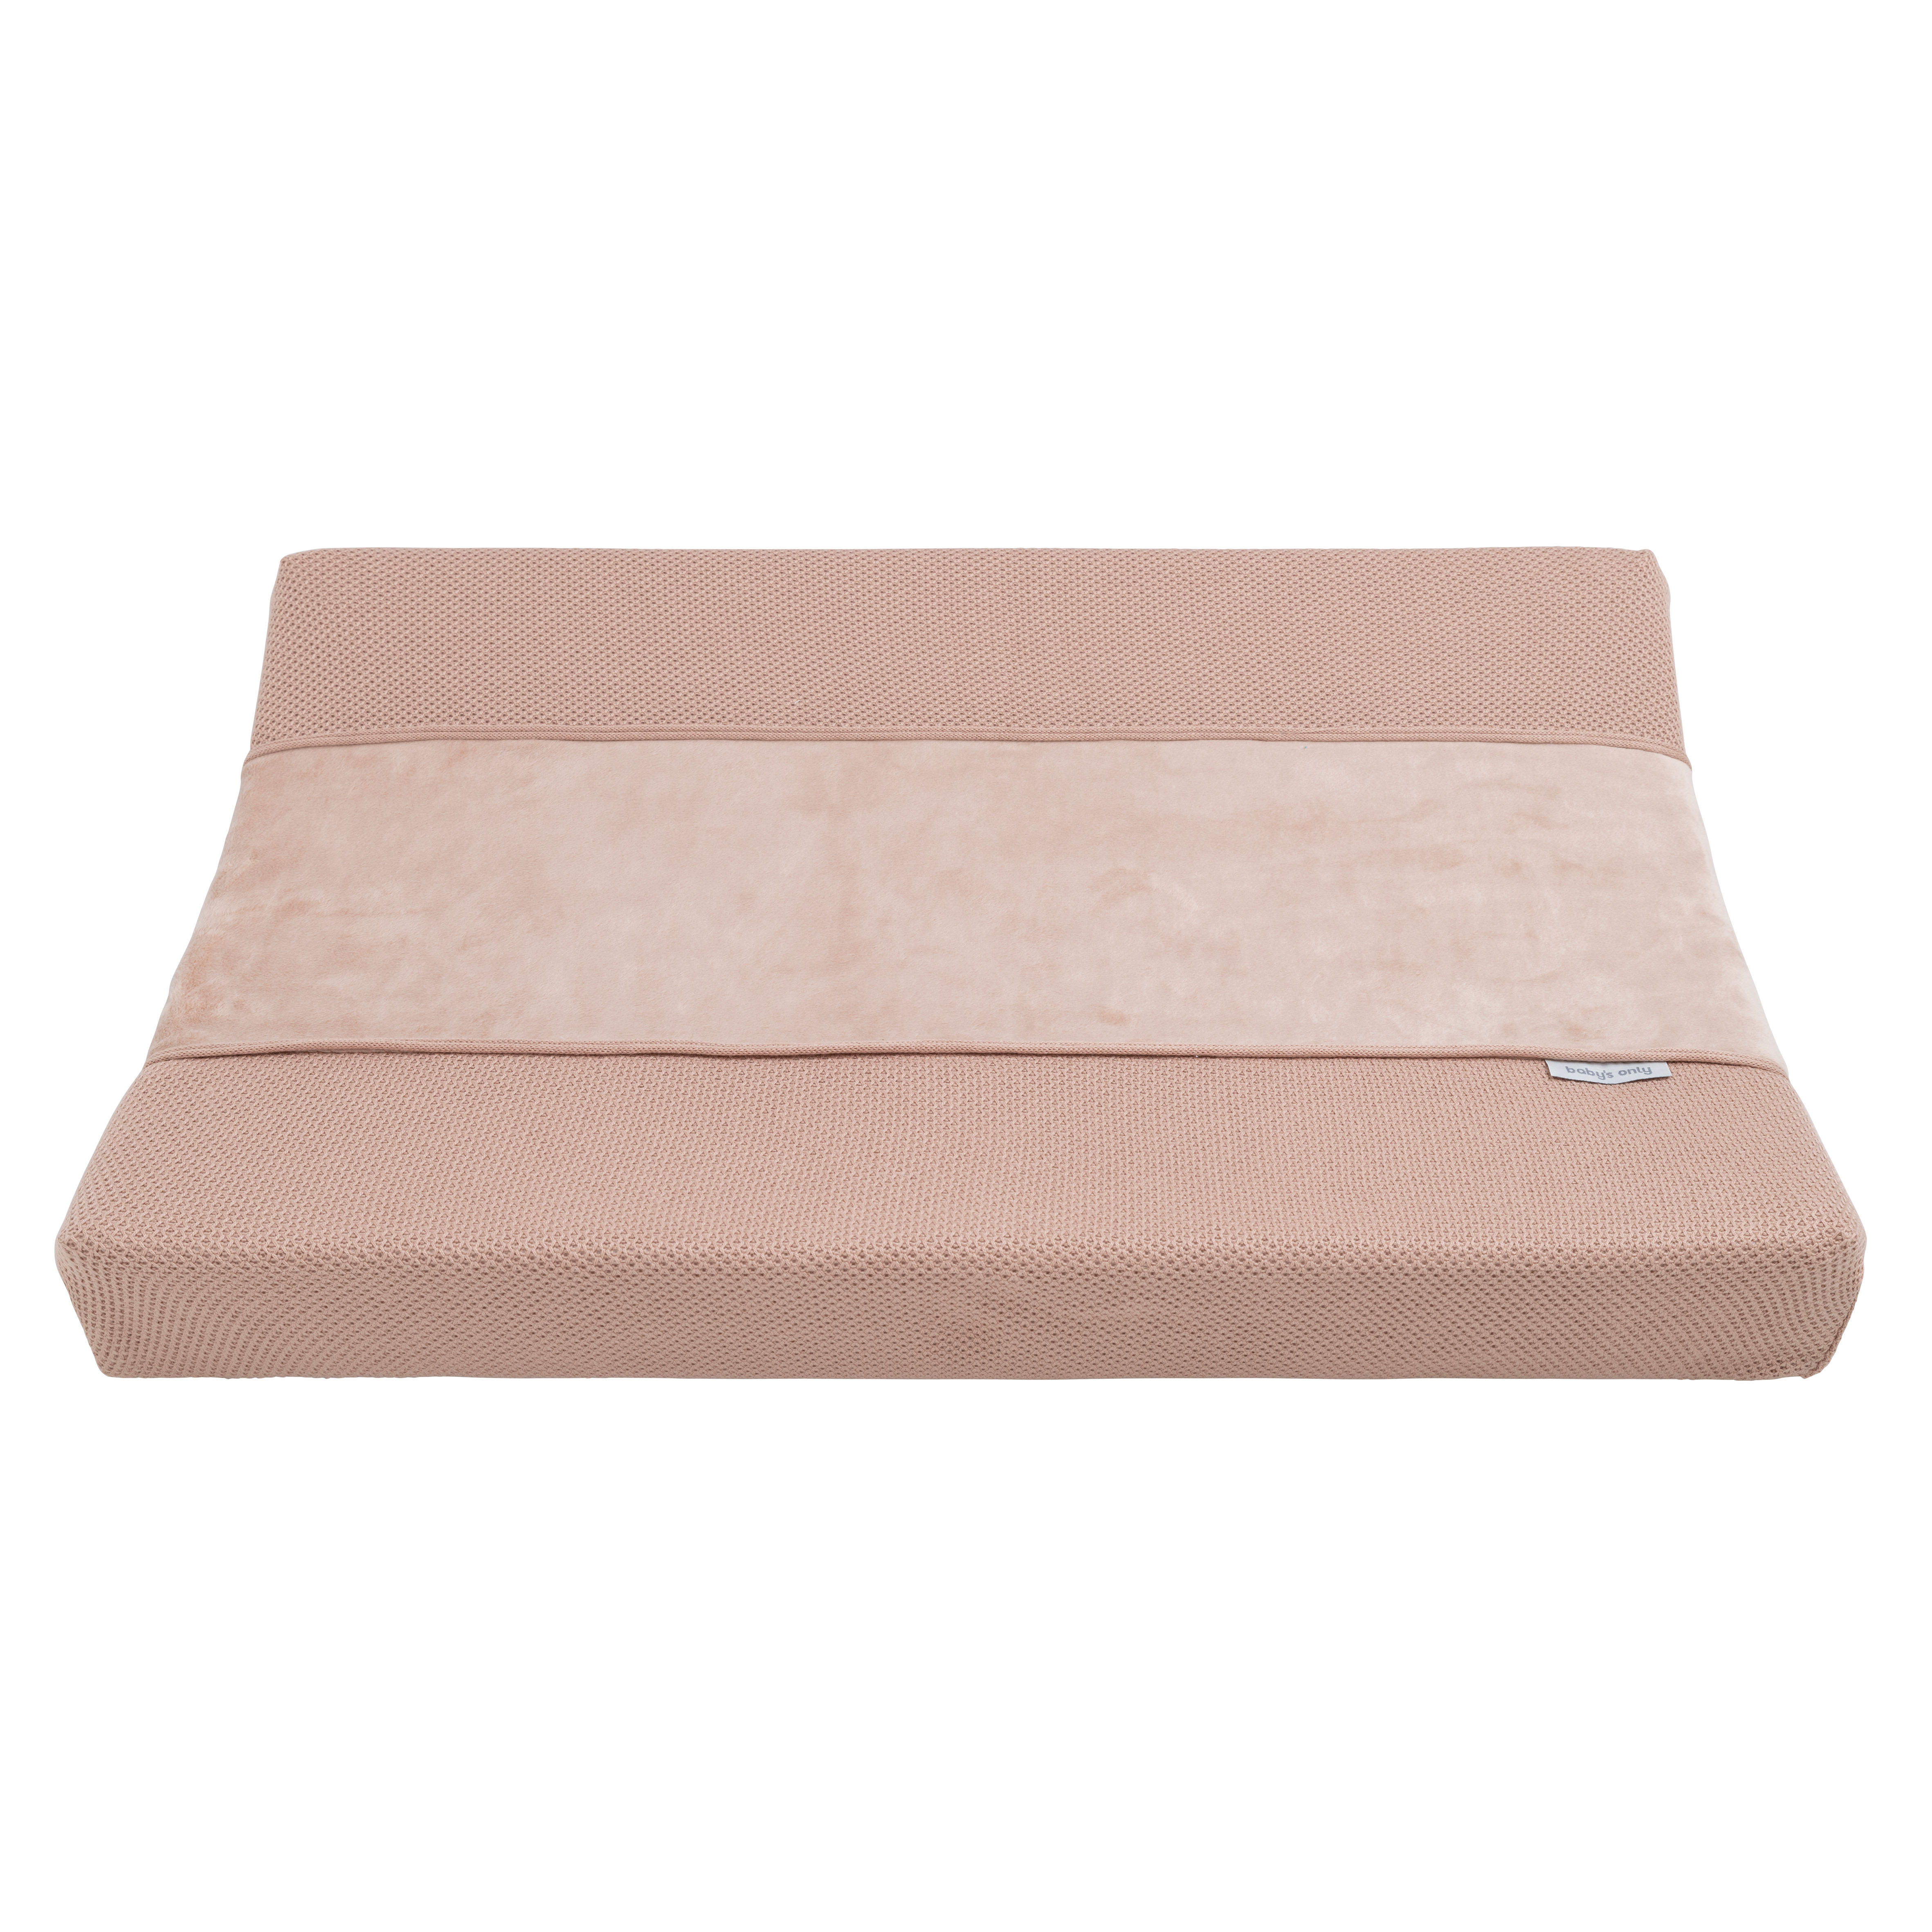 Changing pad cover Classic tuscany - 45x70